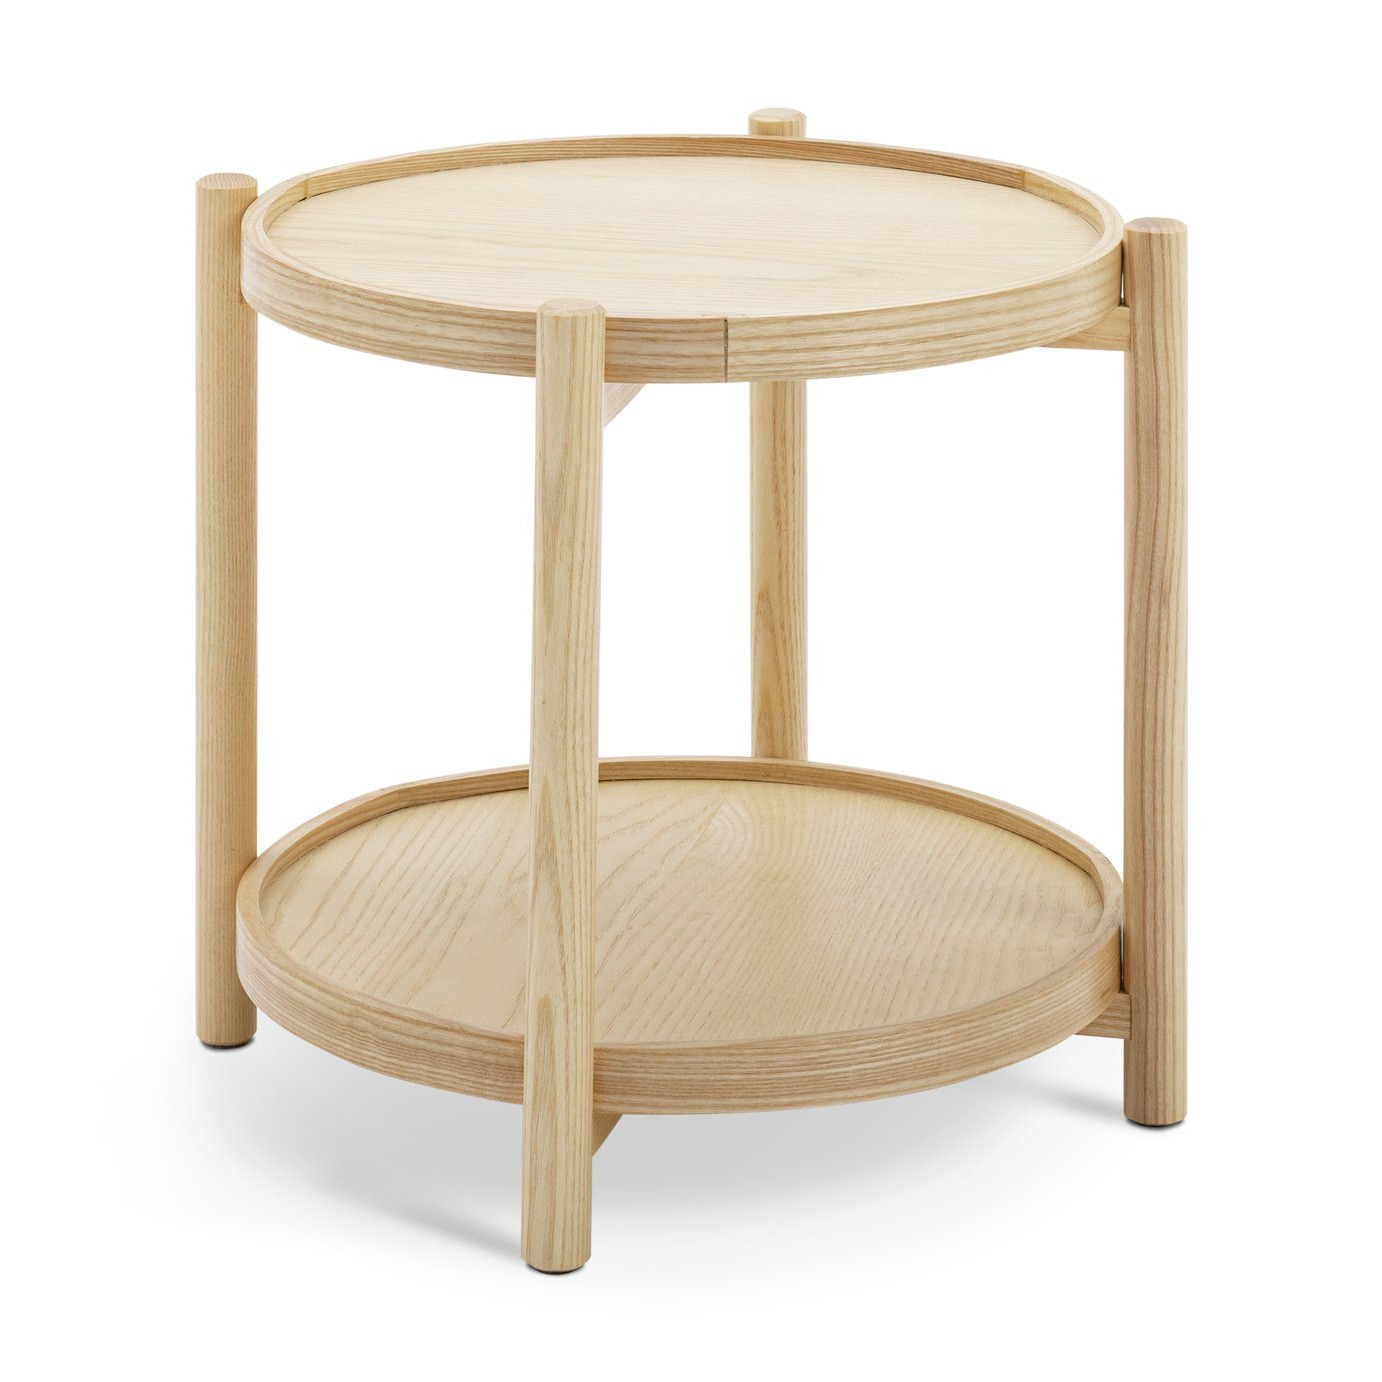 Habitat Selby Side Table - Natural - image 1